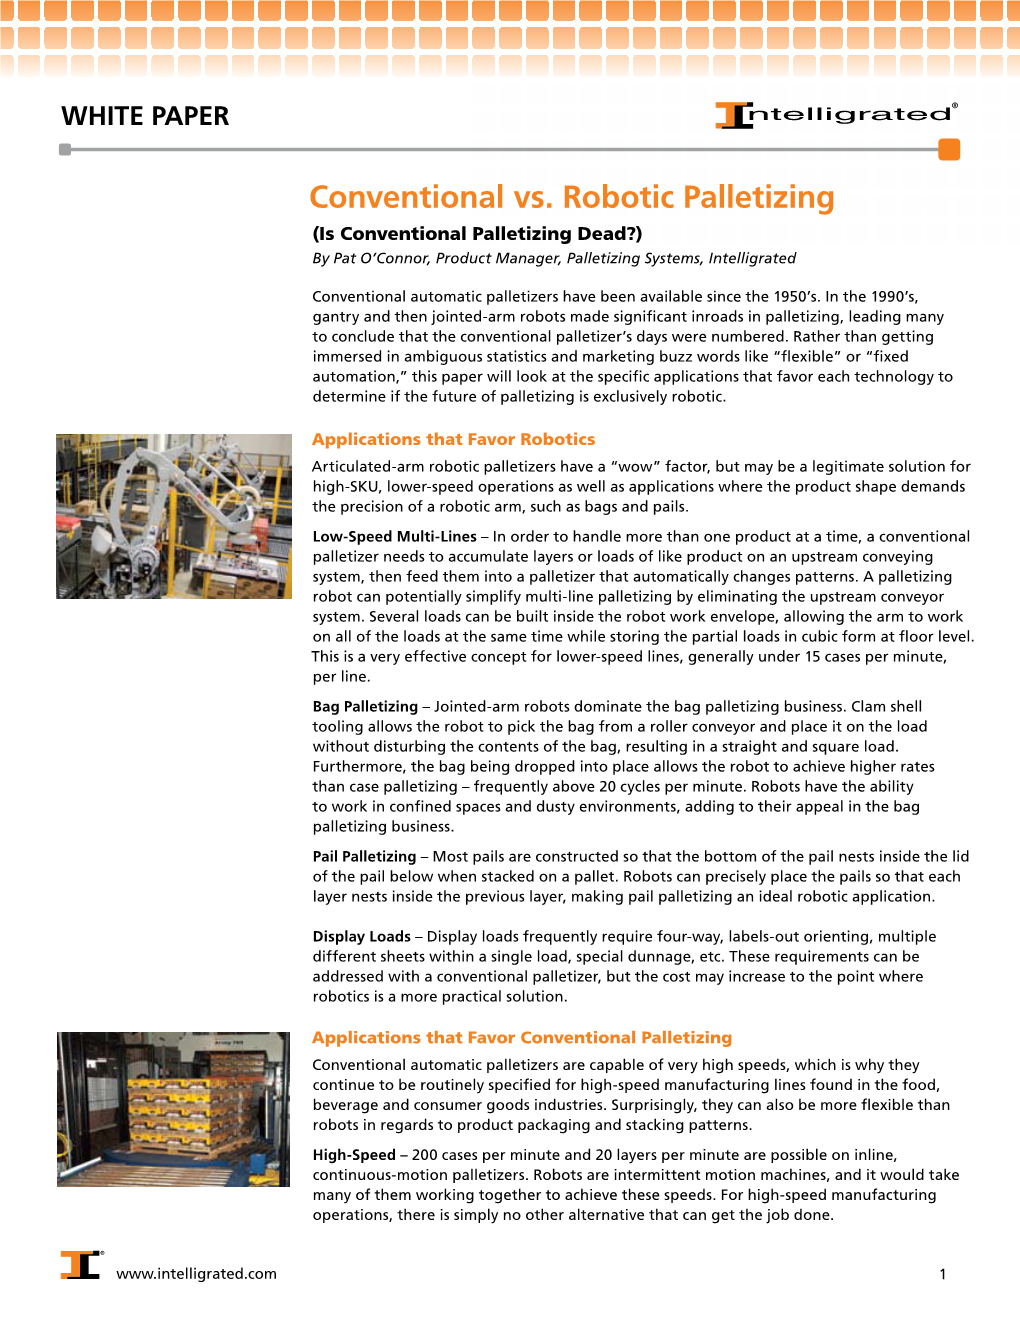 Conventional Vs. Robotic Palletizing (Is Conventional Palletizing Dead?) by Pat O’Connor, Product Manager, Palletizing Systems, Intelligrated